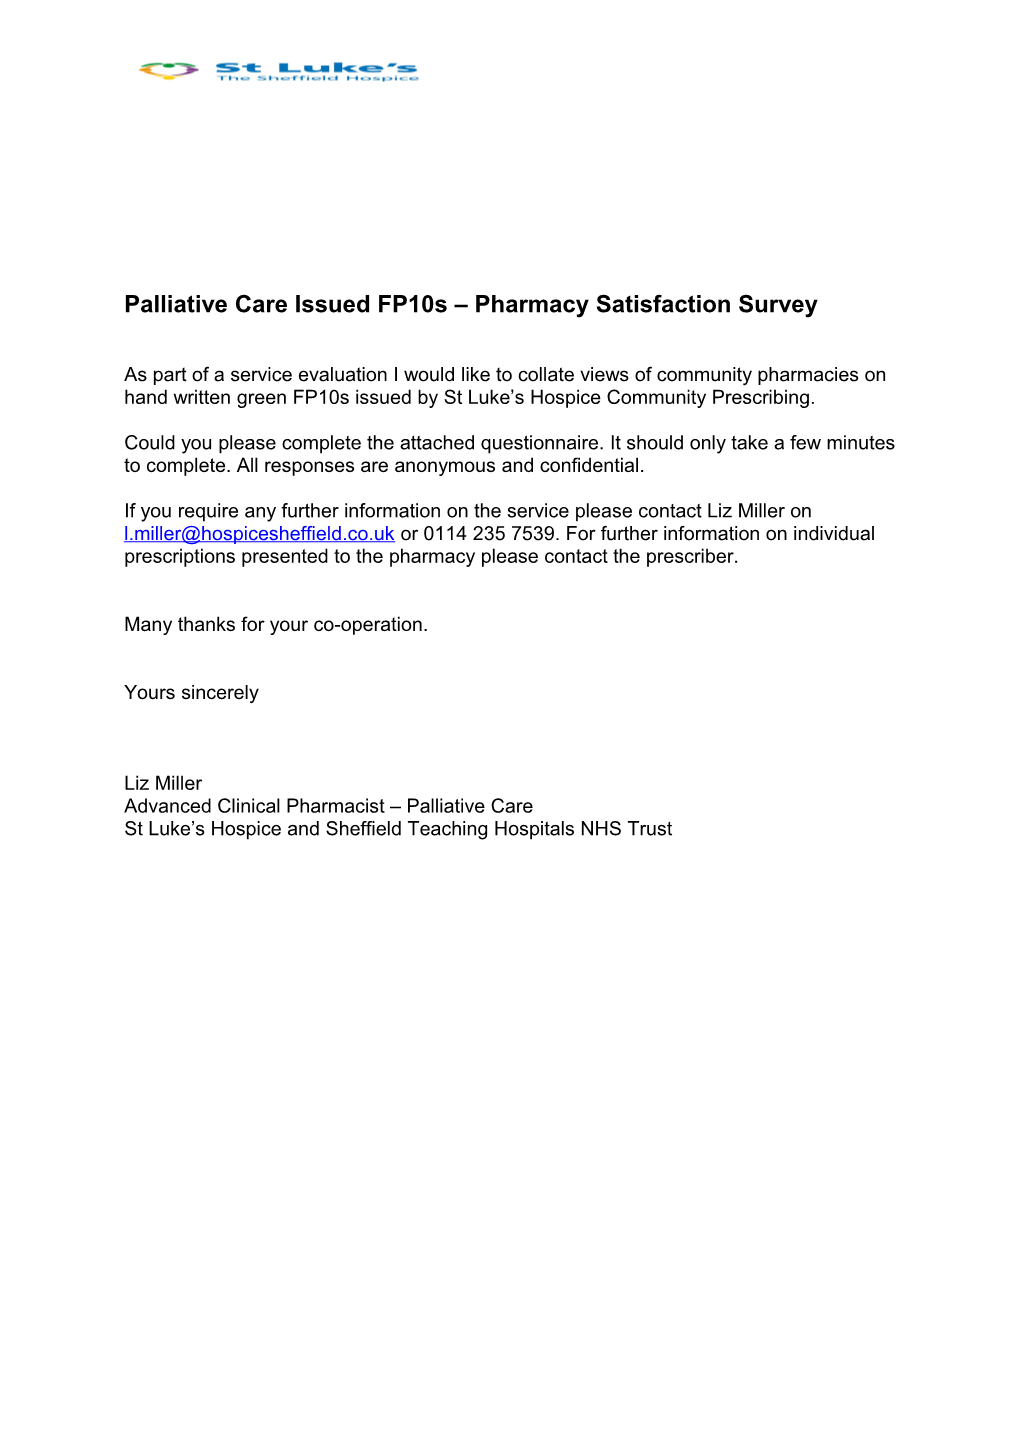 Palliative Care Issued Fp10s Pharmacy Satisfaction Survey